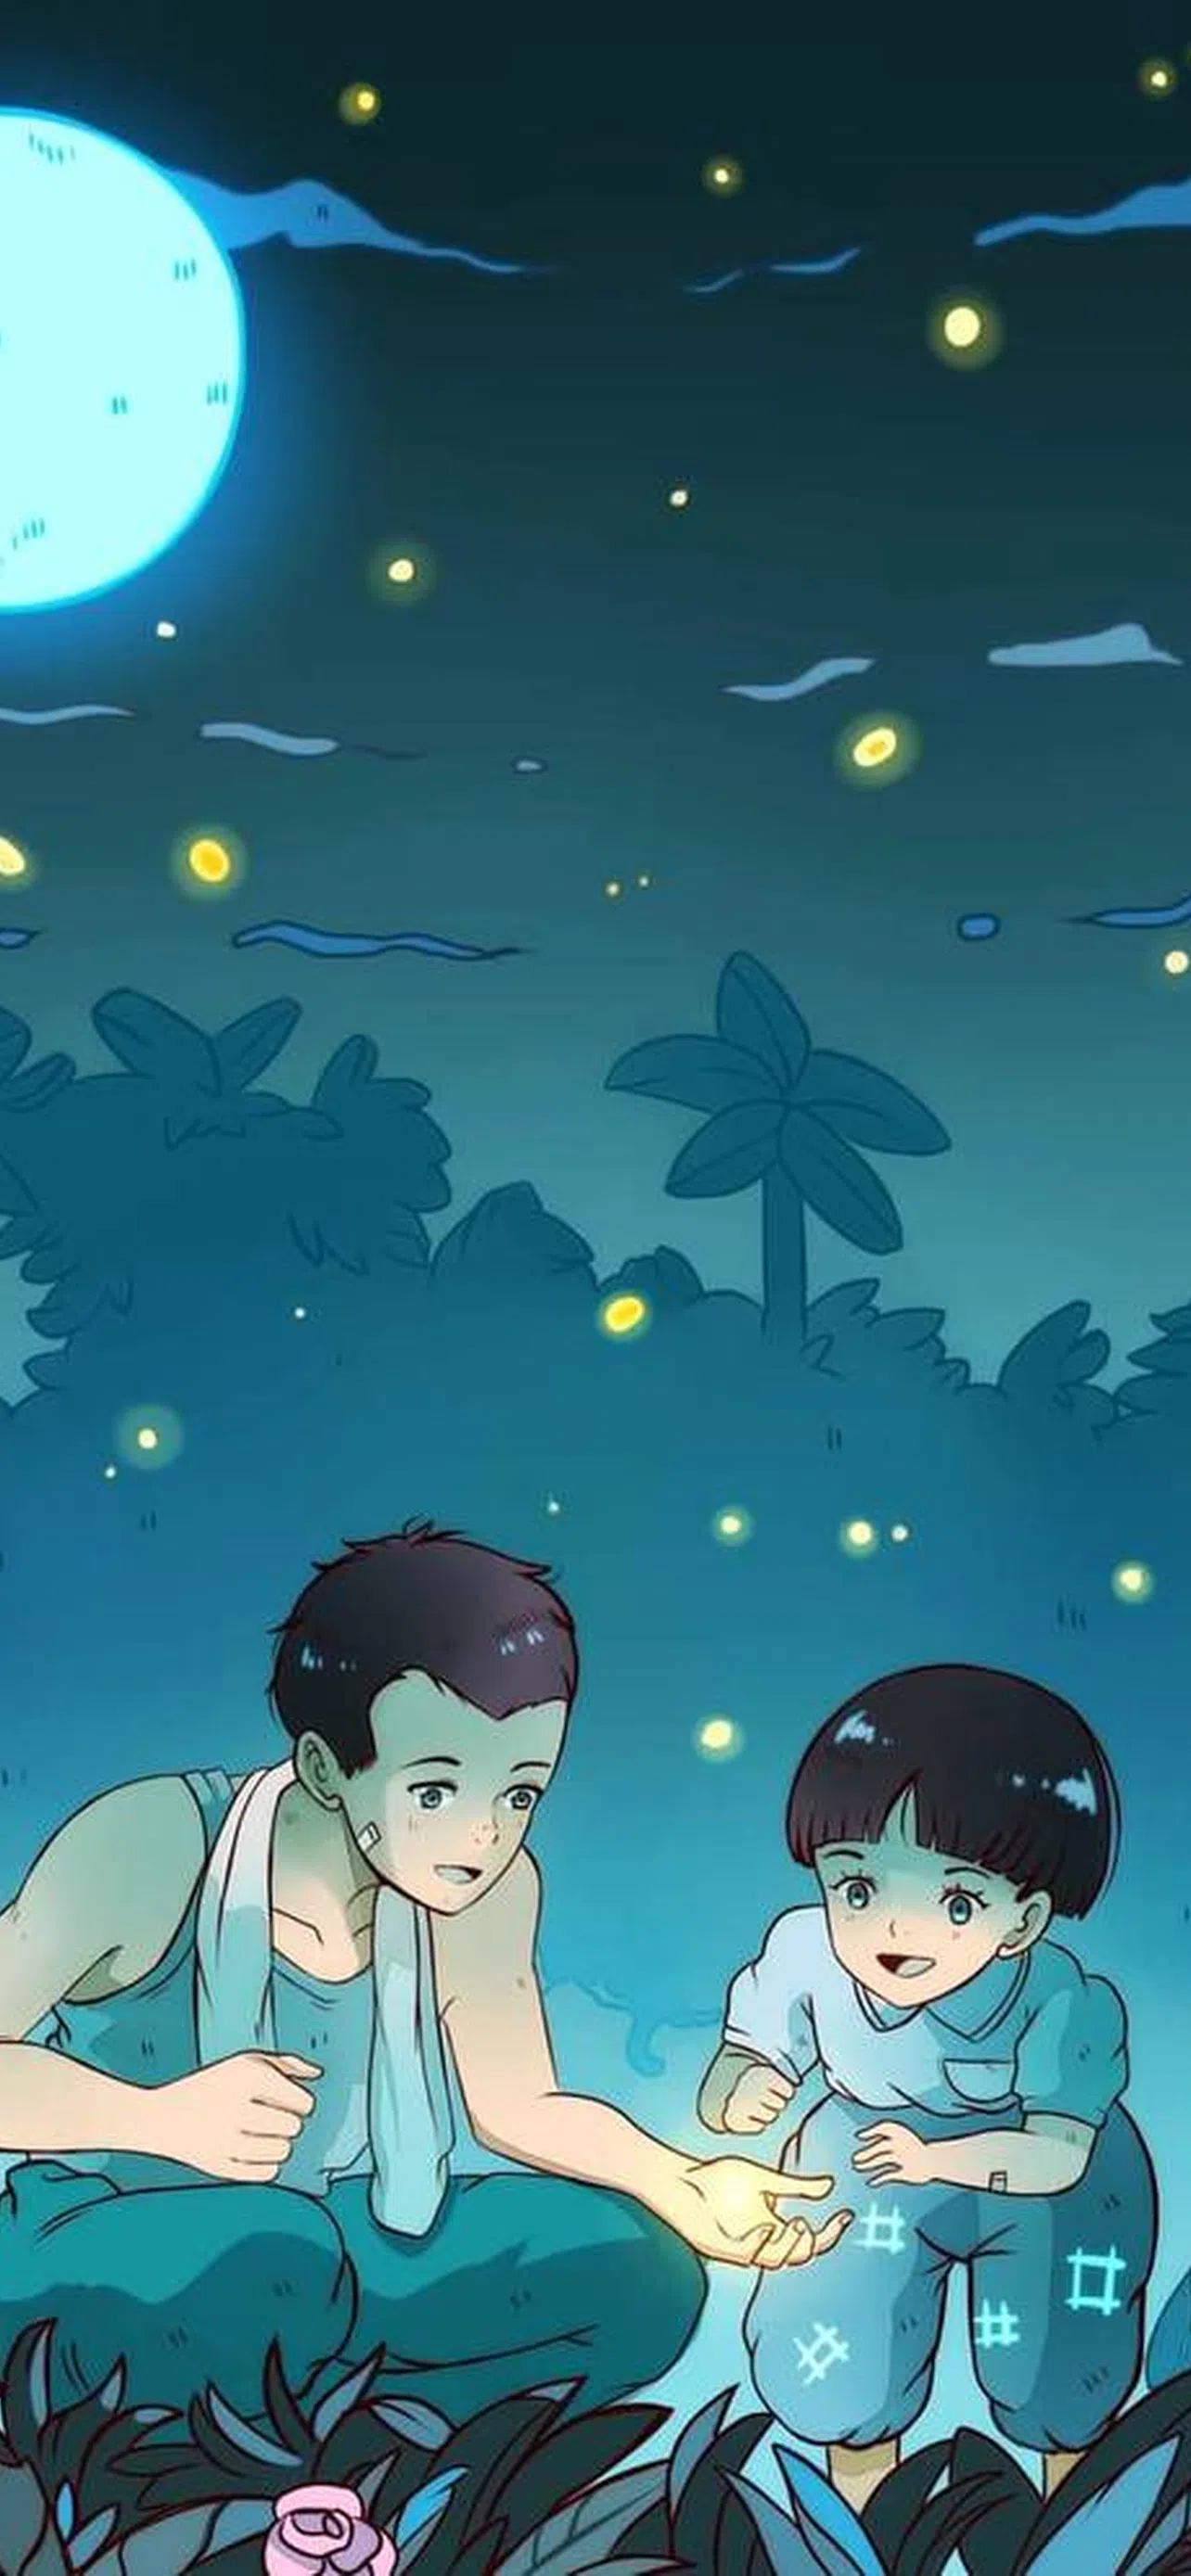 565219 1920x1080 Image for Desktop grave of the fireflies  Rare Gallery  HD Wallpapers